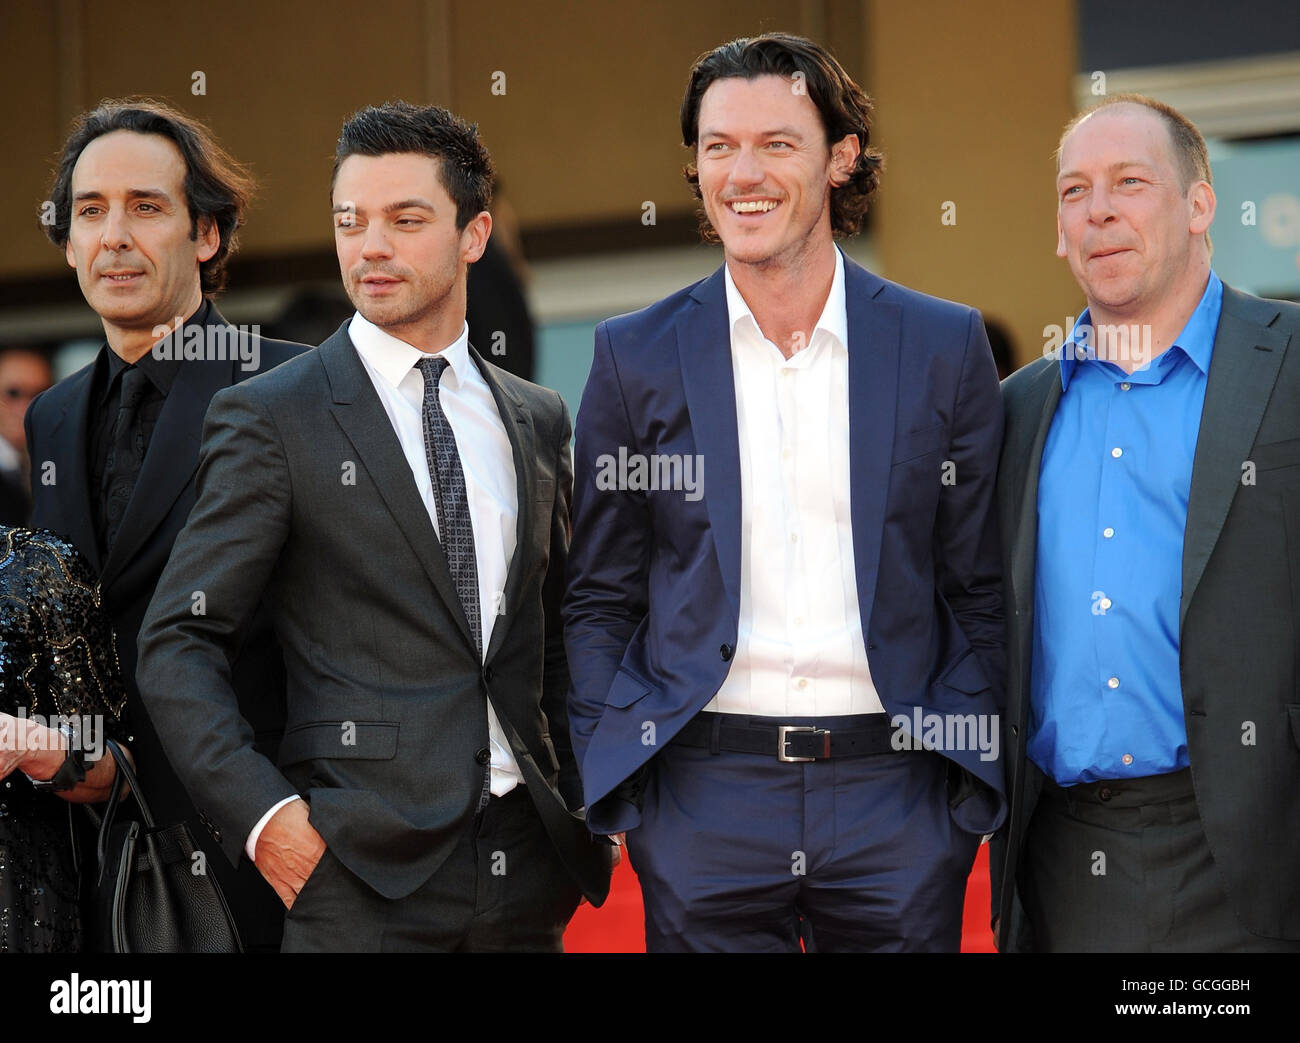 Actors Dominic Cooper, (2nd left), Luke Evans (2nd right) and Bill Camp (right) arrive for the premiere of new Stephen Frears film, Tamara Drewe, in which they star, during the 63rd Cannes Film Festival, France. Stock Photo